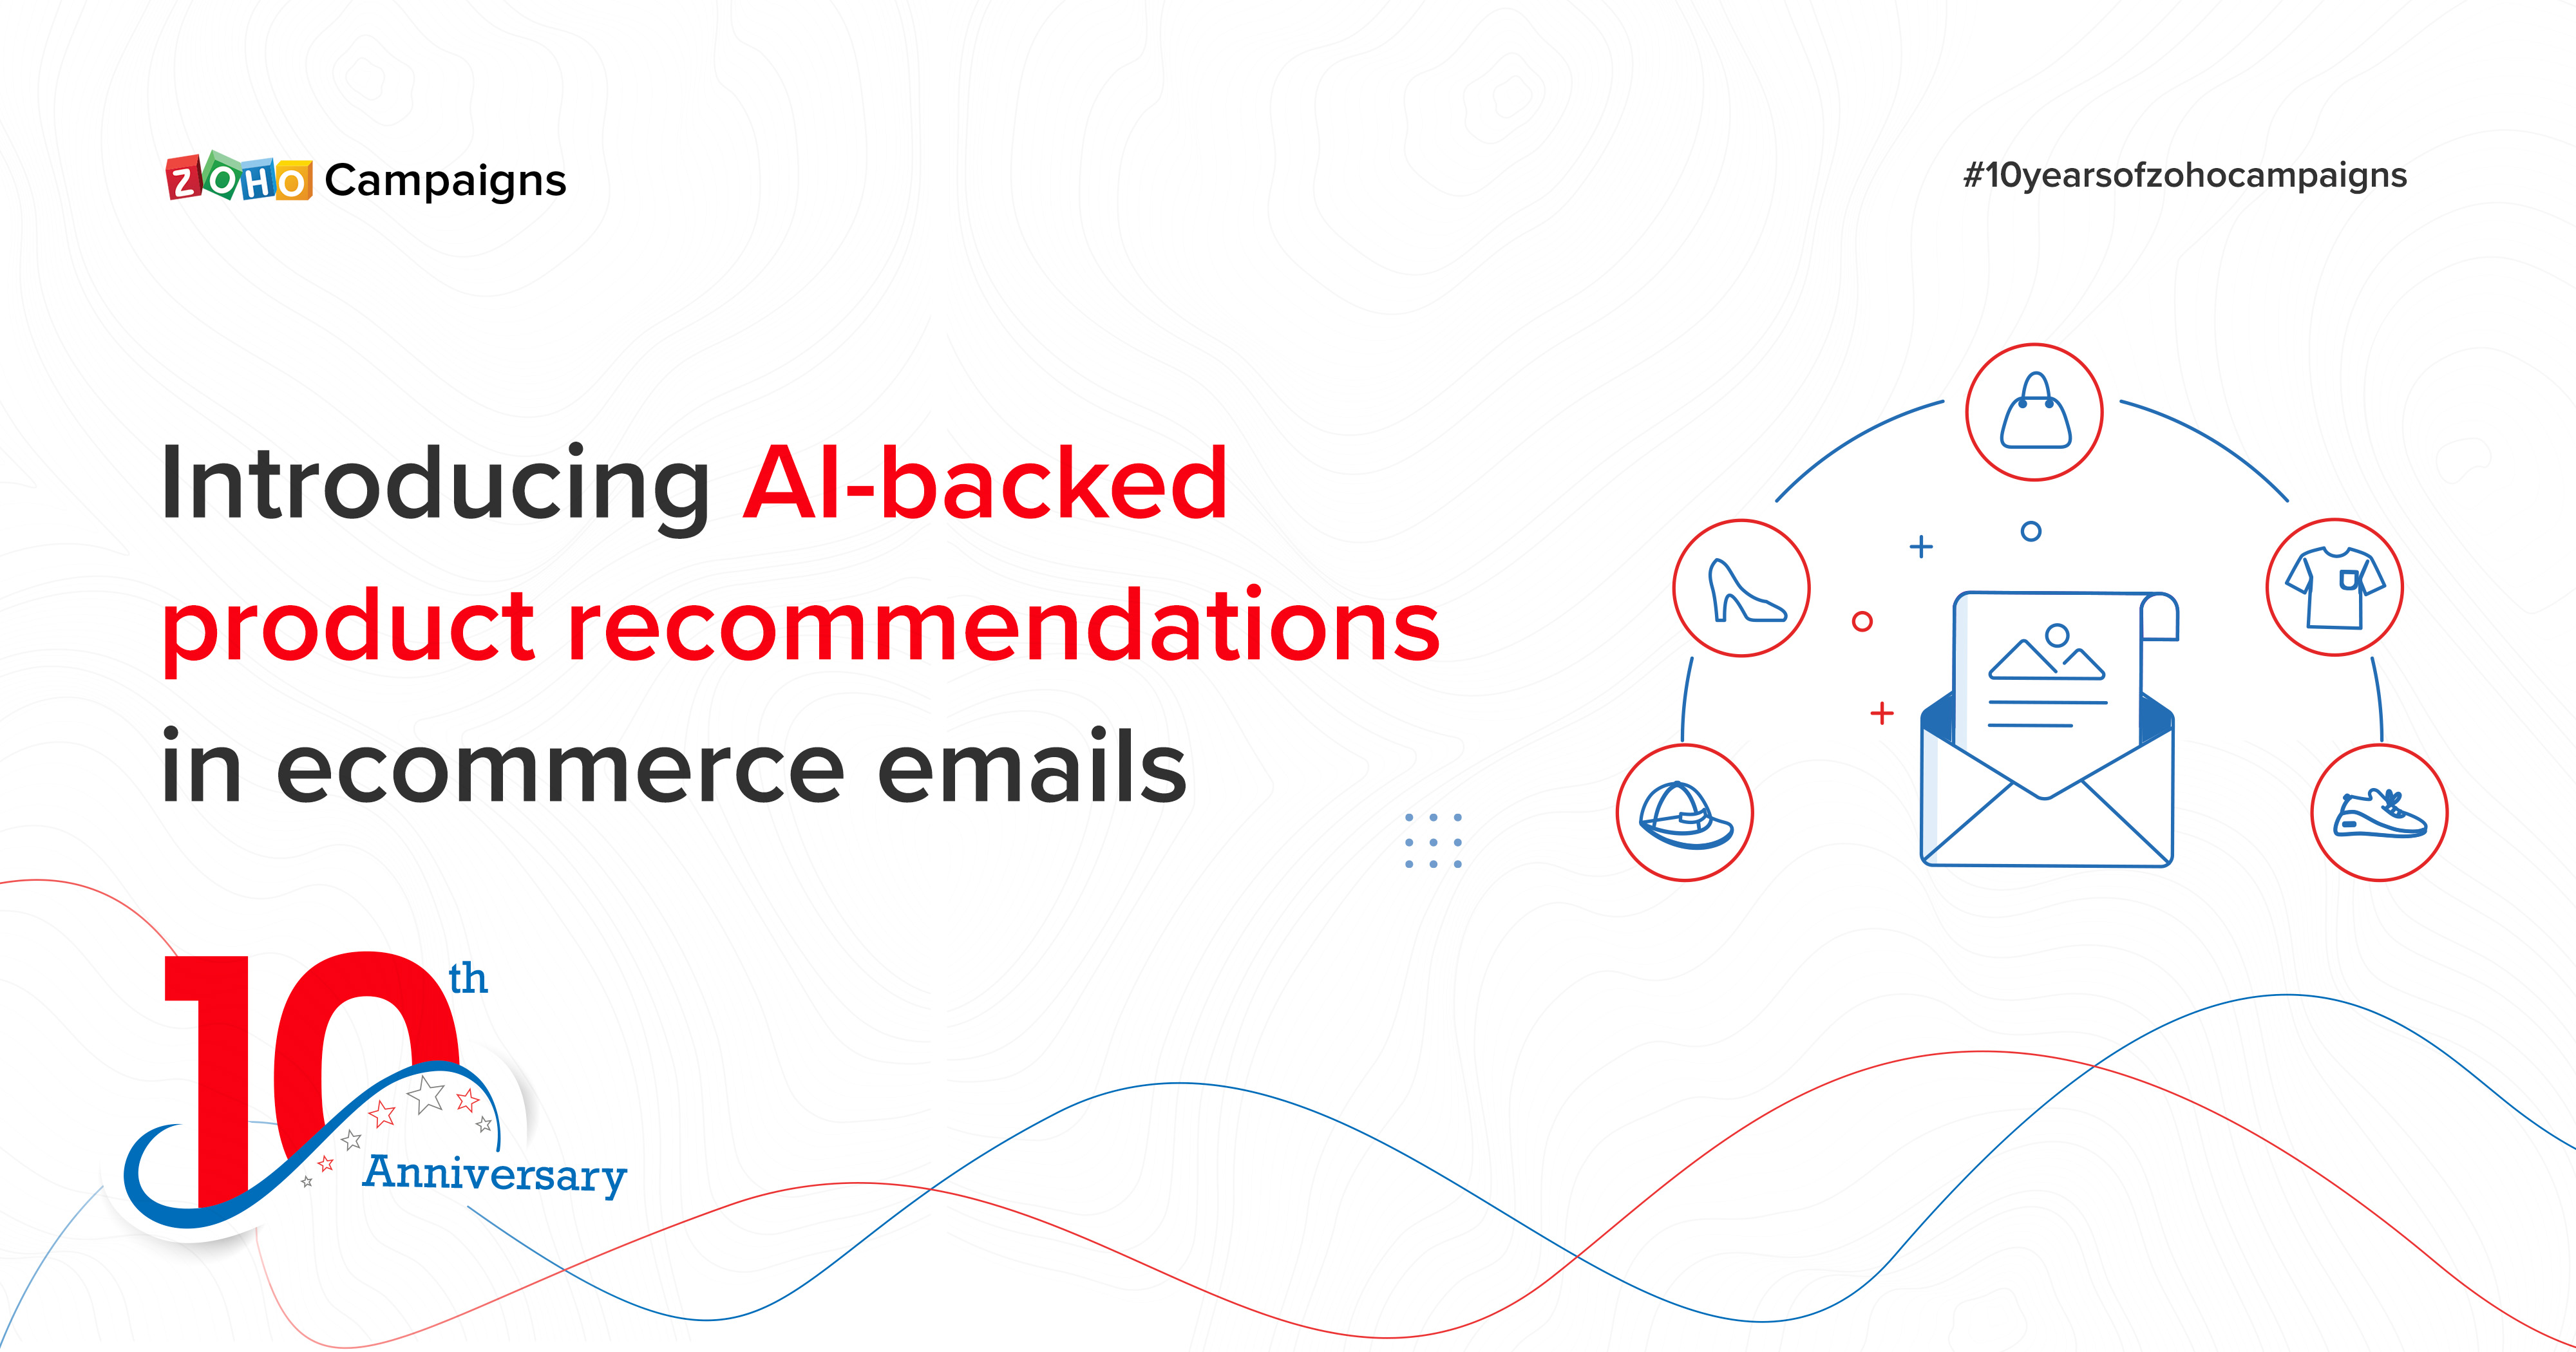 Introducing AI-backed product recommendations in ecommerce emails  